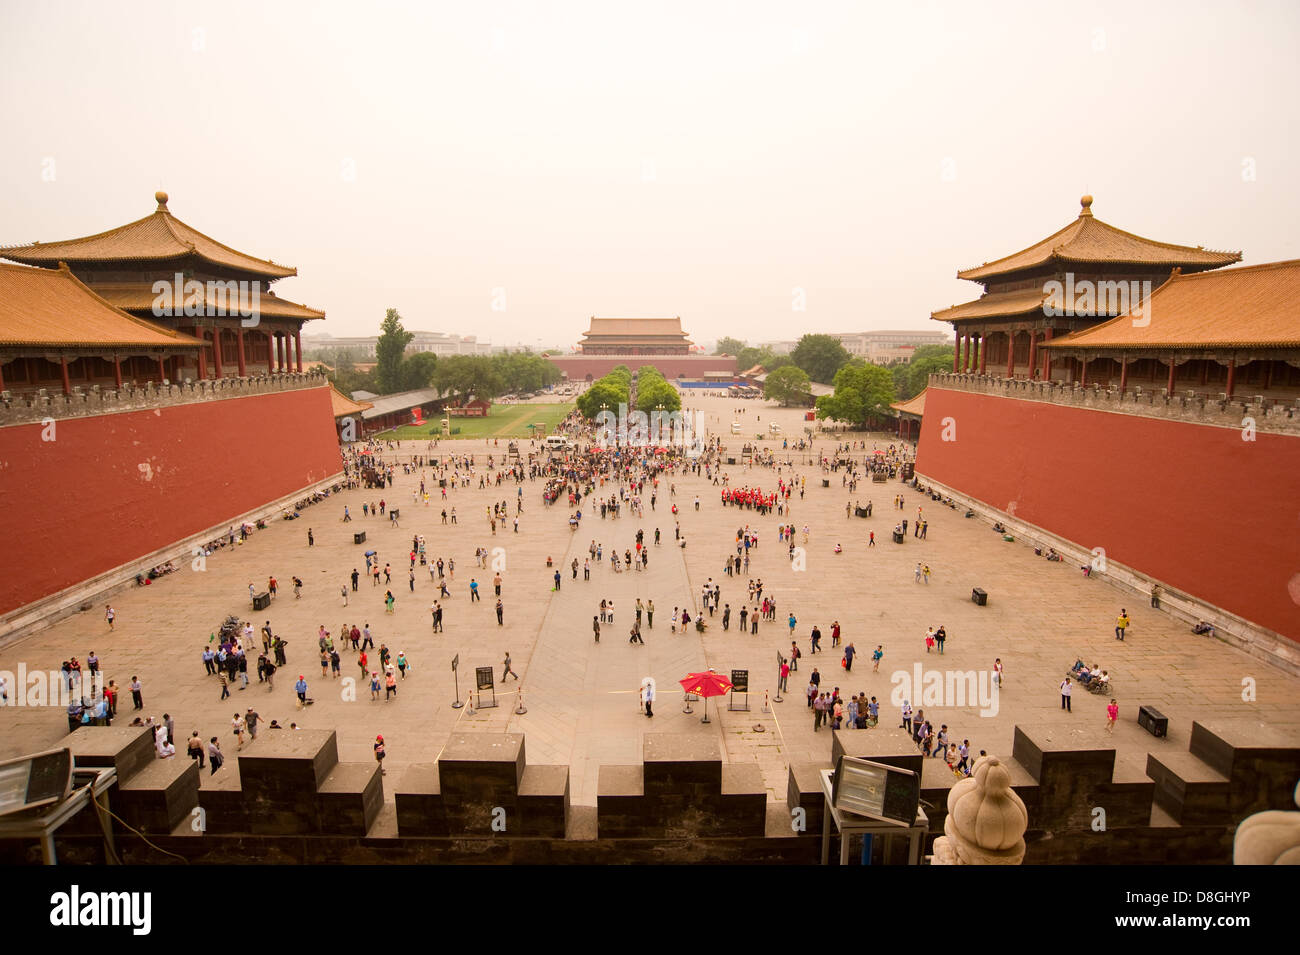 Tourists gather around the Forbidden City and Tiananmen Square in Beijing, China. Stock Photo